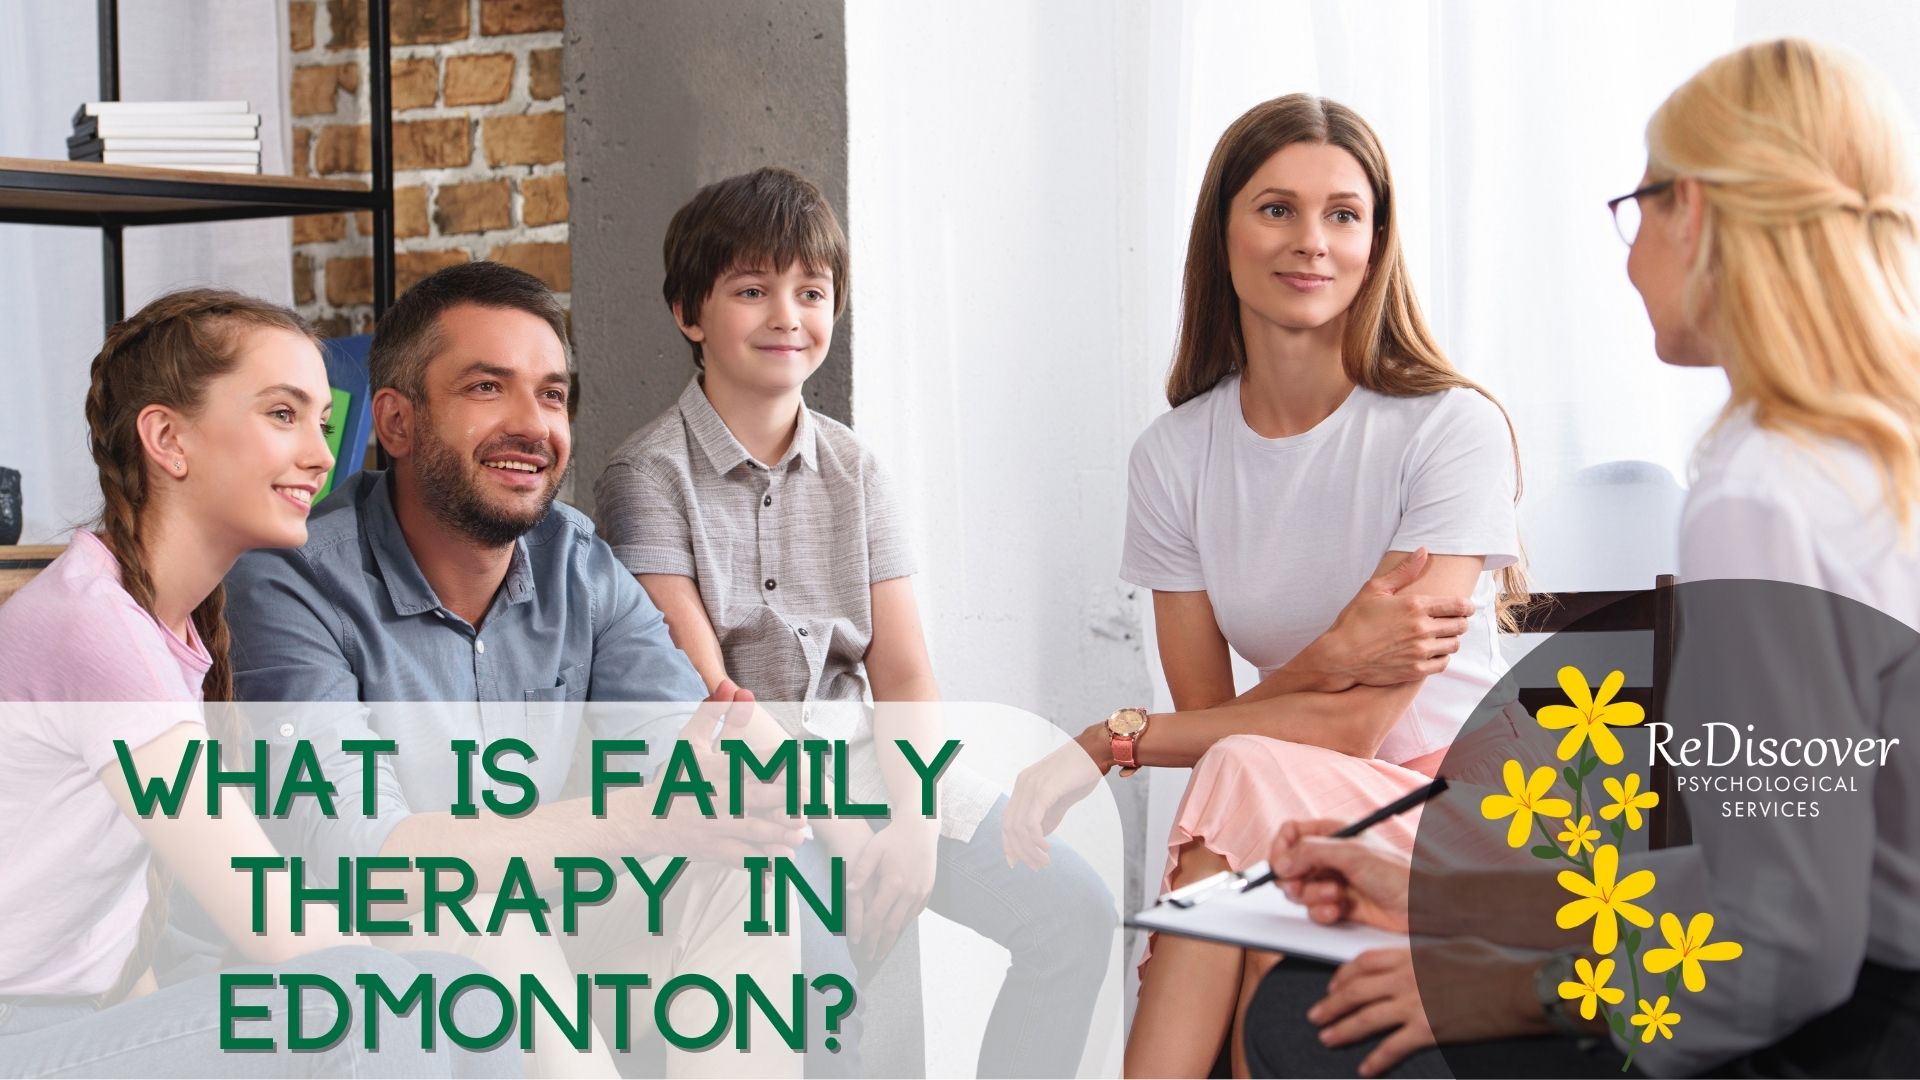 What is Family Therapy in Edmonton?